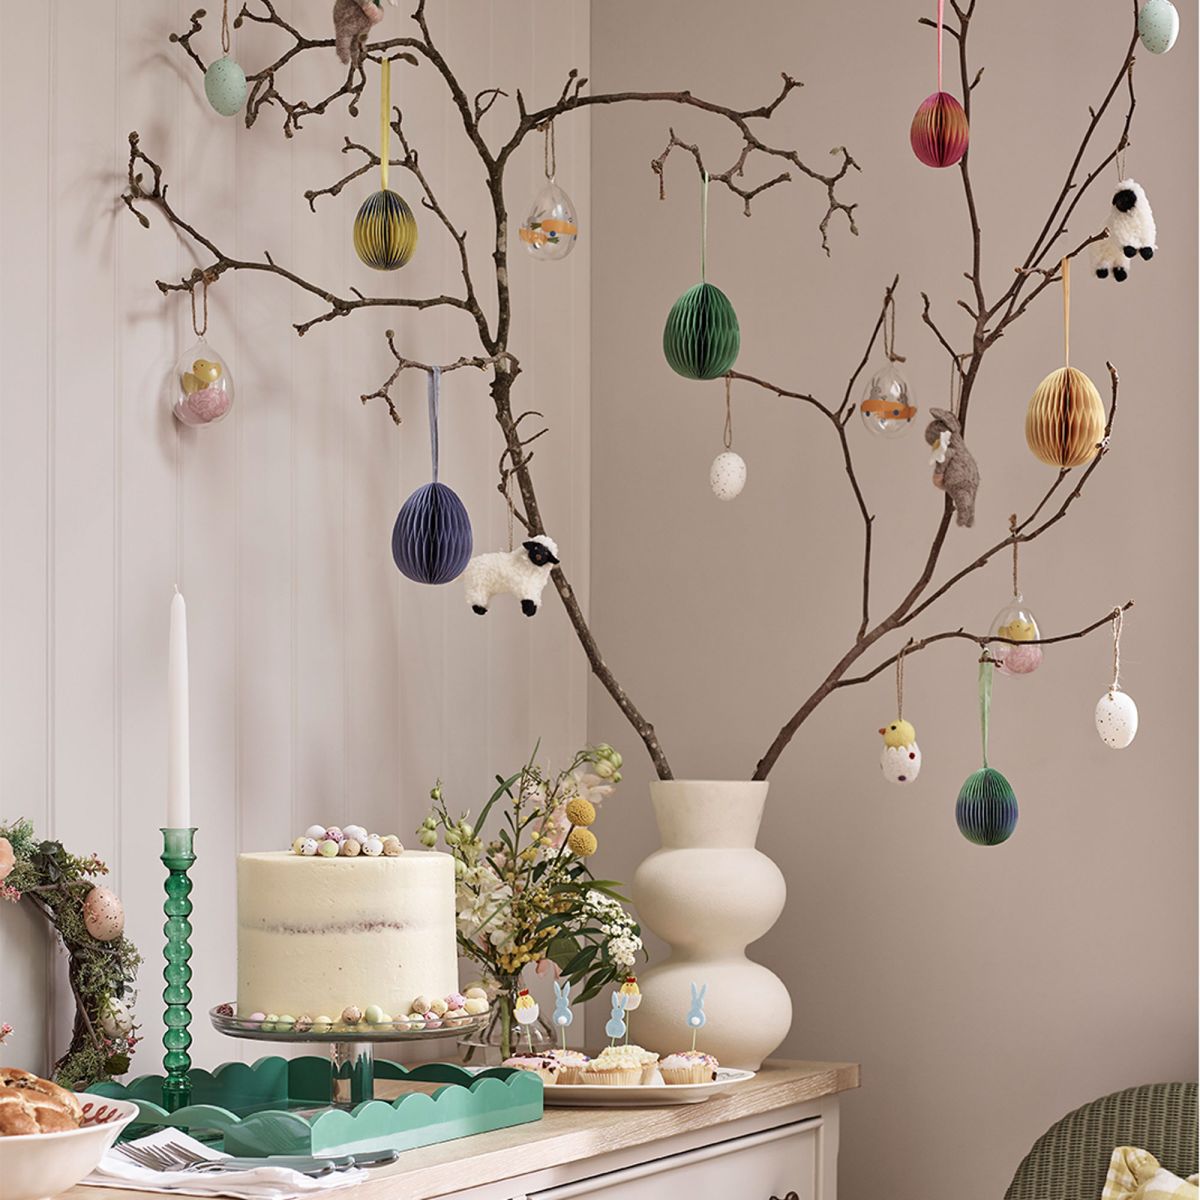 Easter decorating is a fantastic way to shake off the gloom of winter. Using pretty florals, soft pastels, cute bunnies and chicks goes a long way to brighten up the mood and get your home looking colourful again. #homedecor #decoratingideas bit.ly/38TuNZw